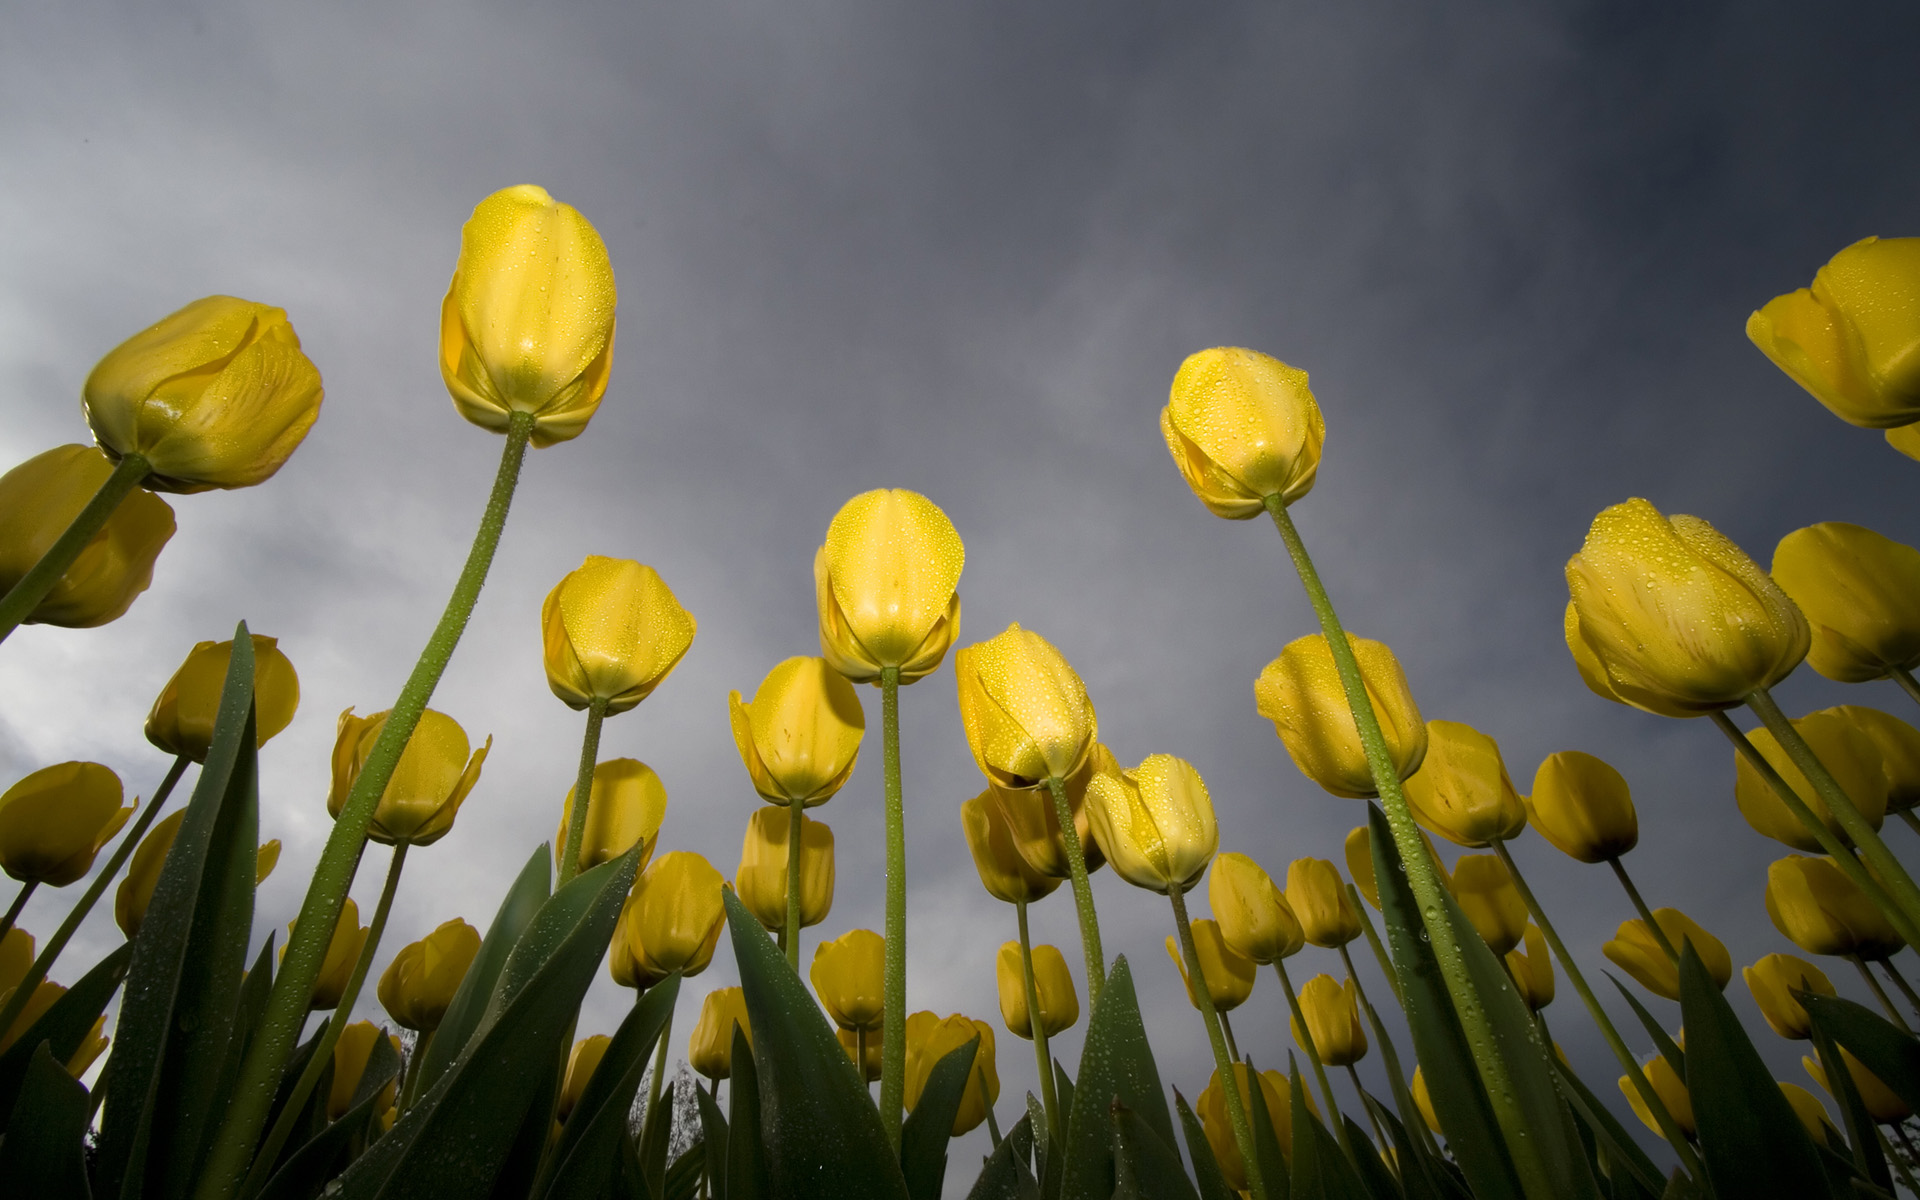 Low Angle Tulips Best Background Full HD1920x1080p, 1280x720p, – HD Wallpapers Backgrounds Desktop, iphone & Android Free Download